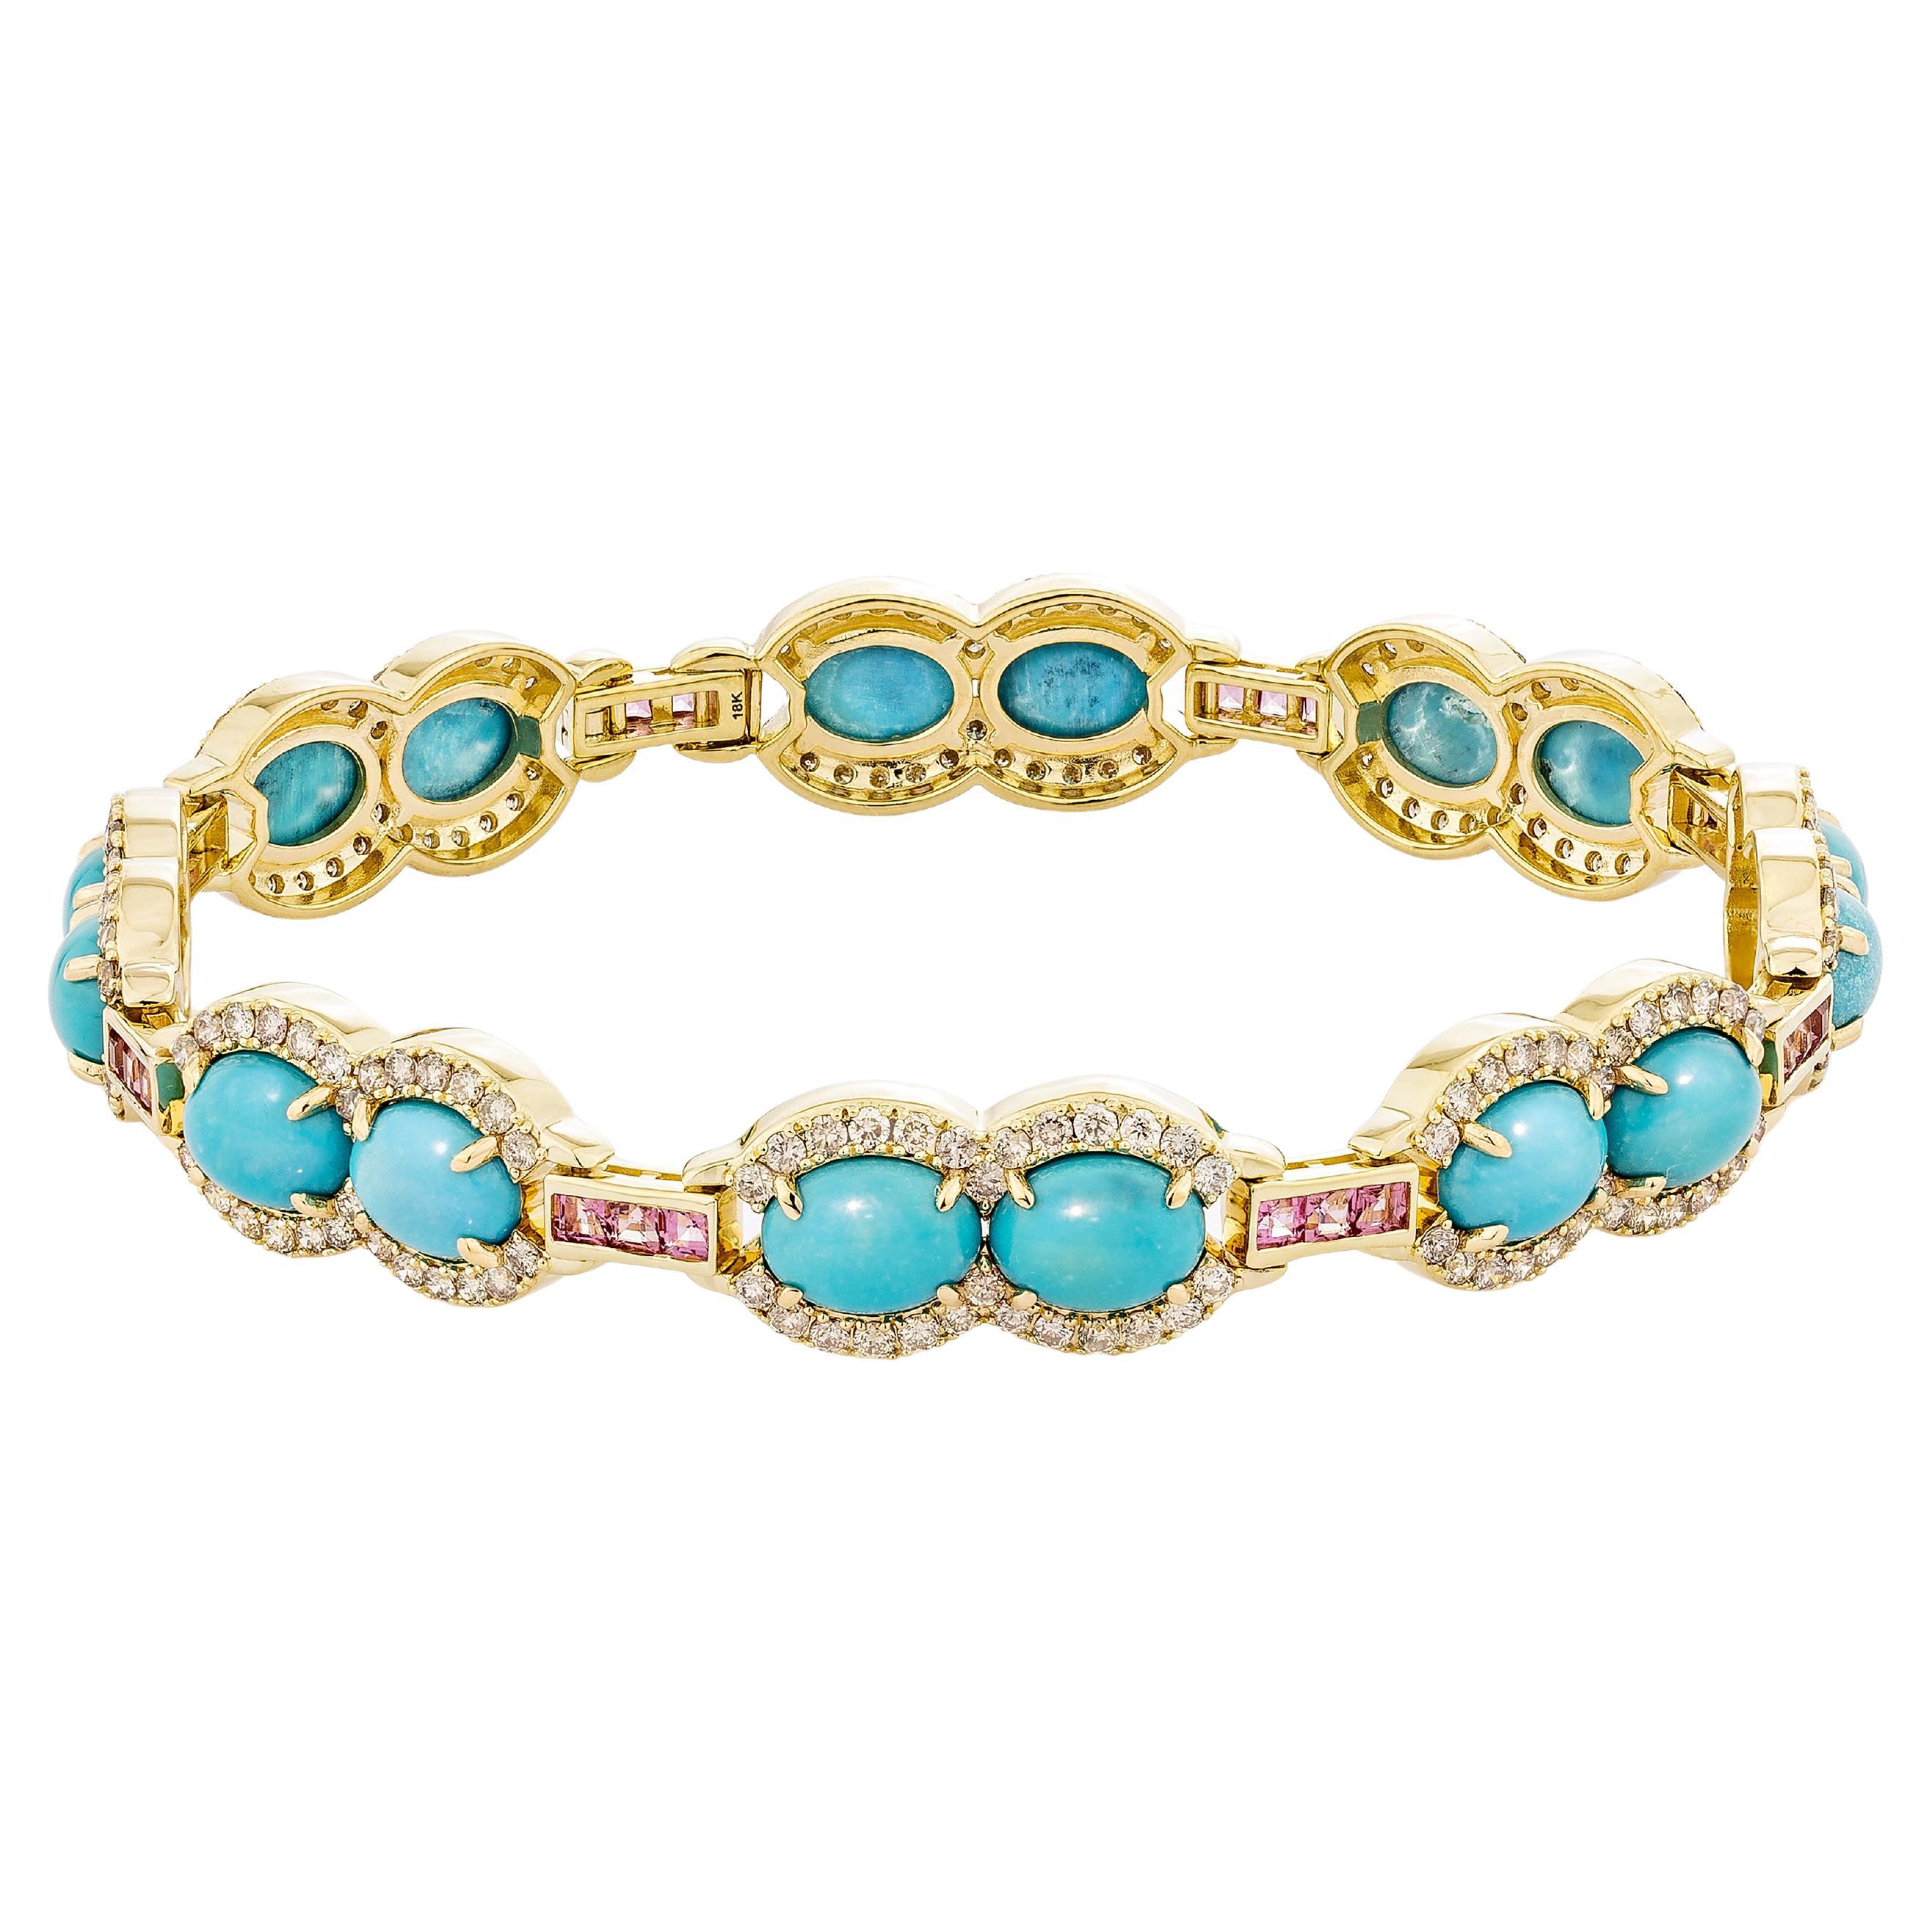 16.55 Carat Turquoise Bracelet in 14KYG with Pink Tourmaline and White Diamond.